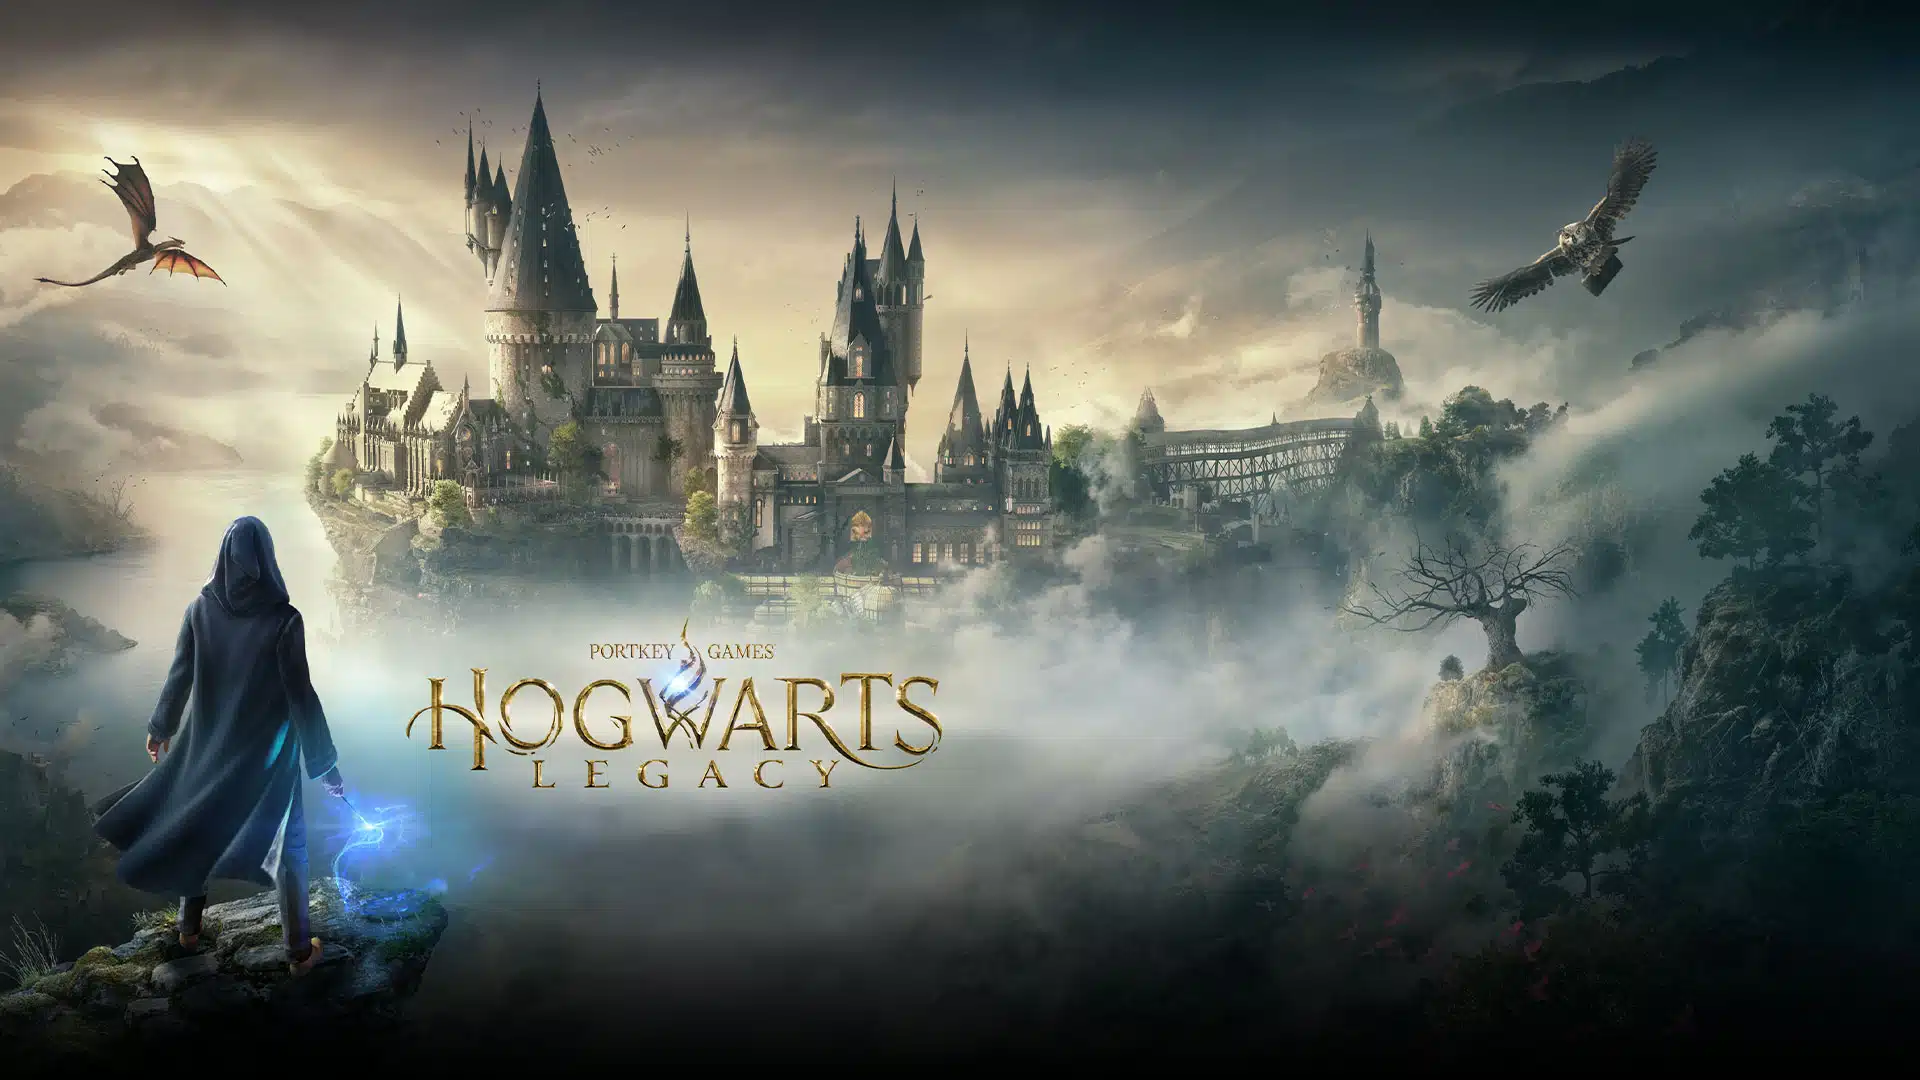 Hogwarts Legacy: A Magical Journey Through the Wizarding World